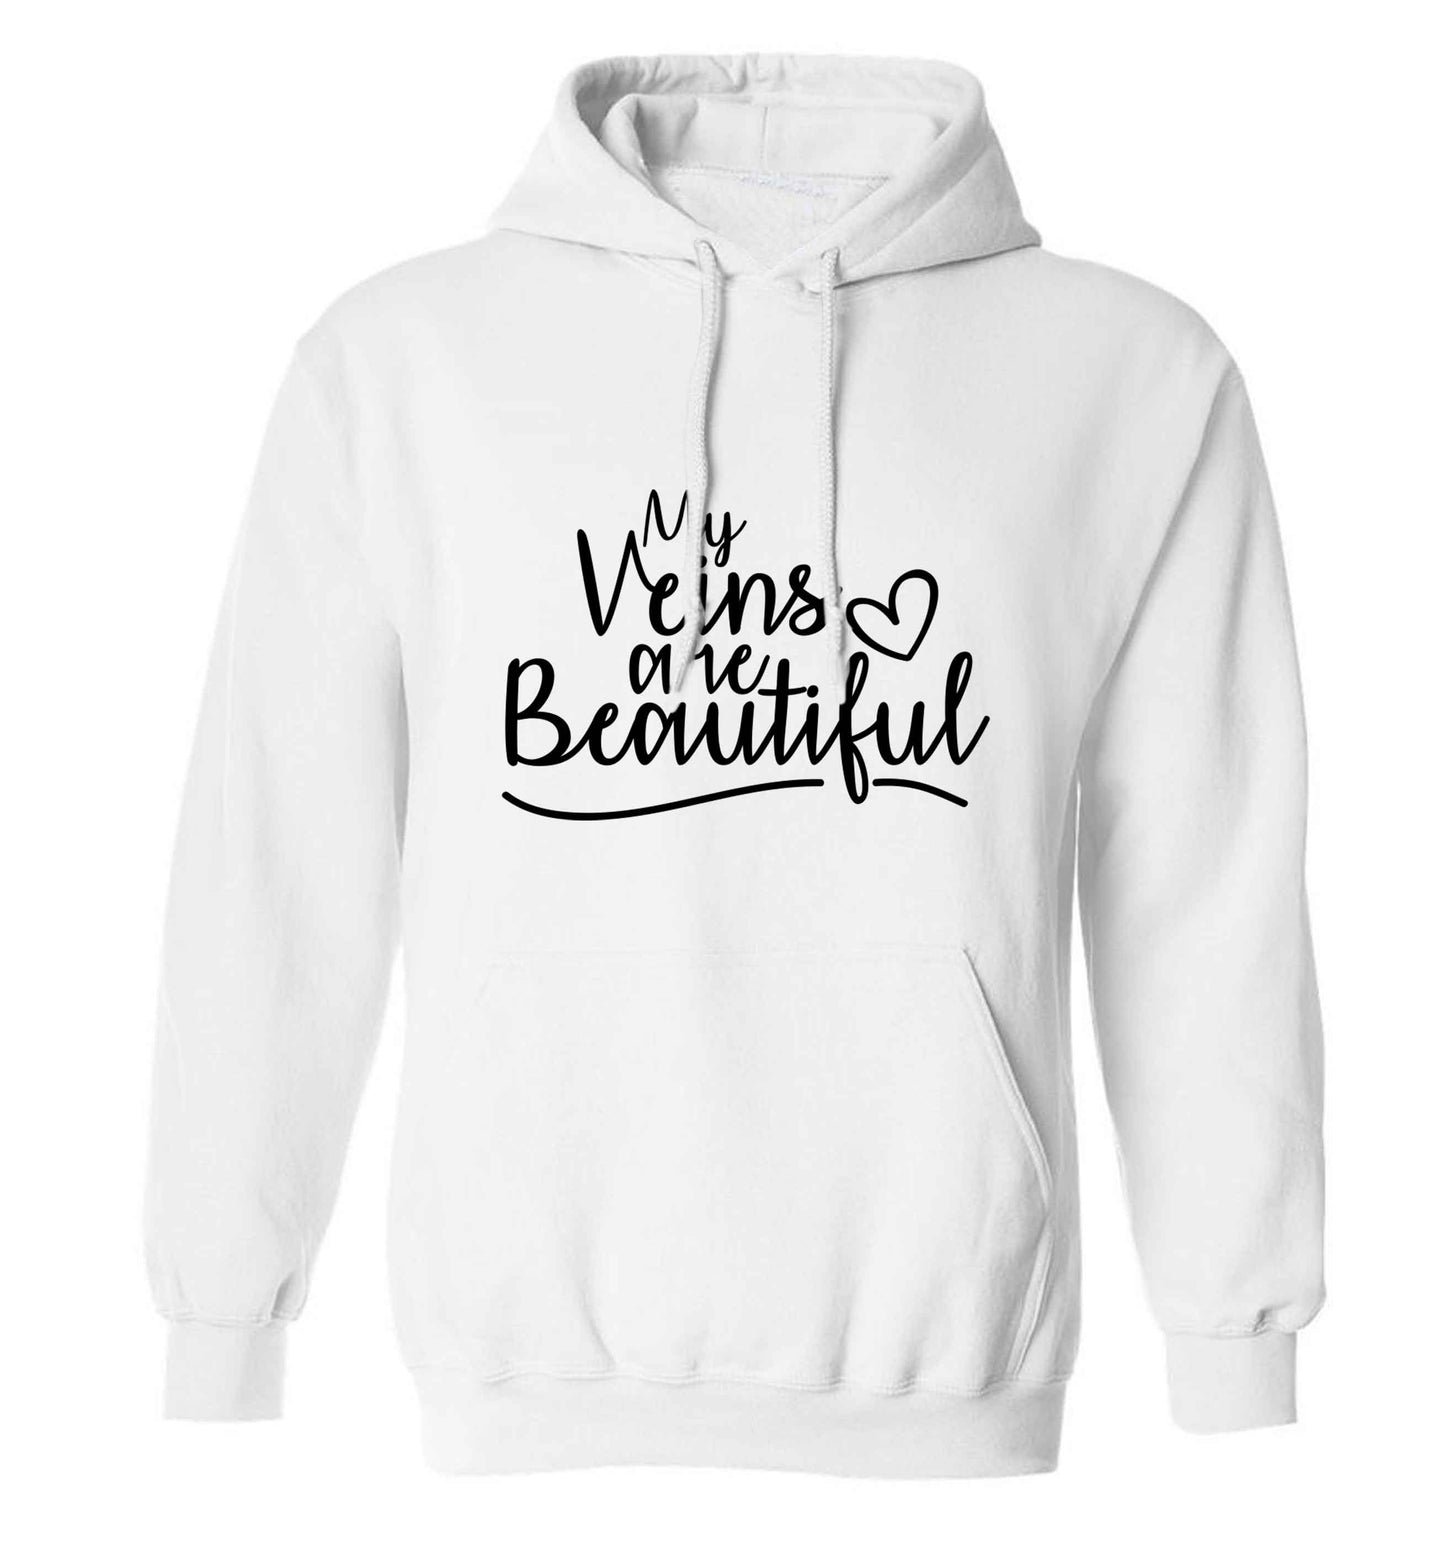 My Veins are Beautiful adults unisex white hoodie 2XL